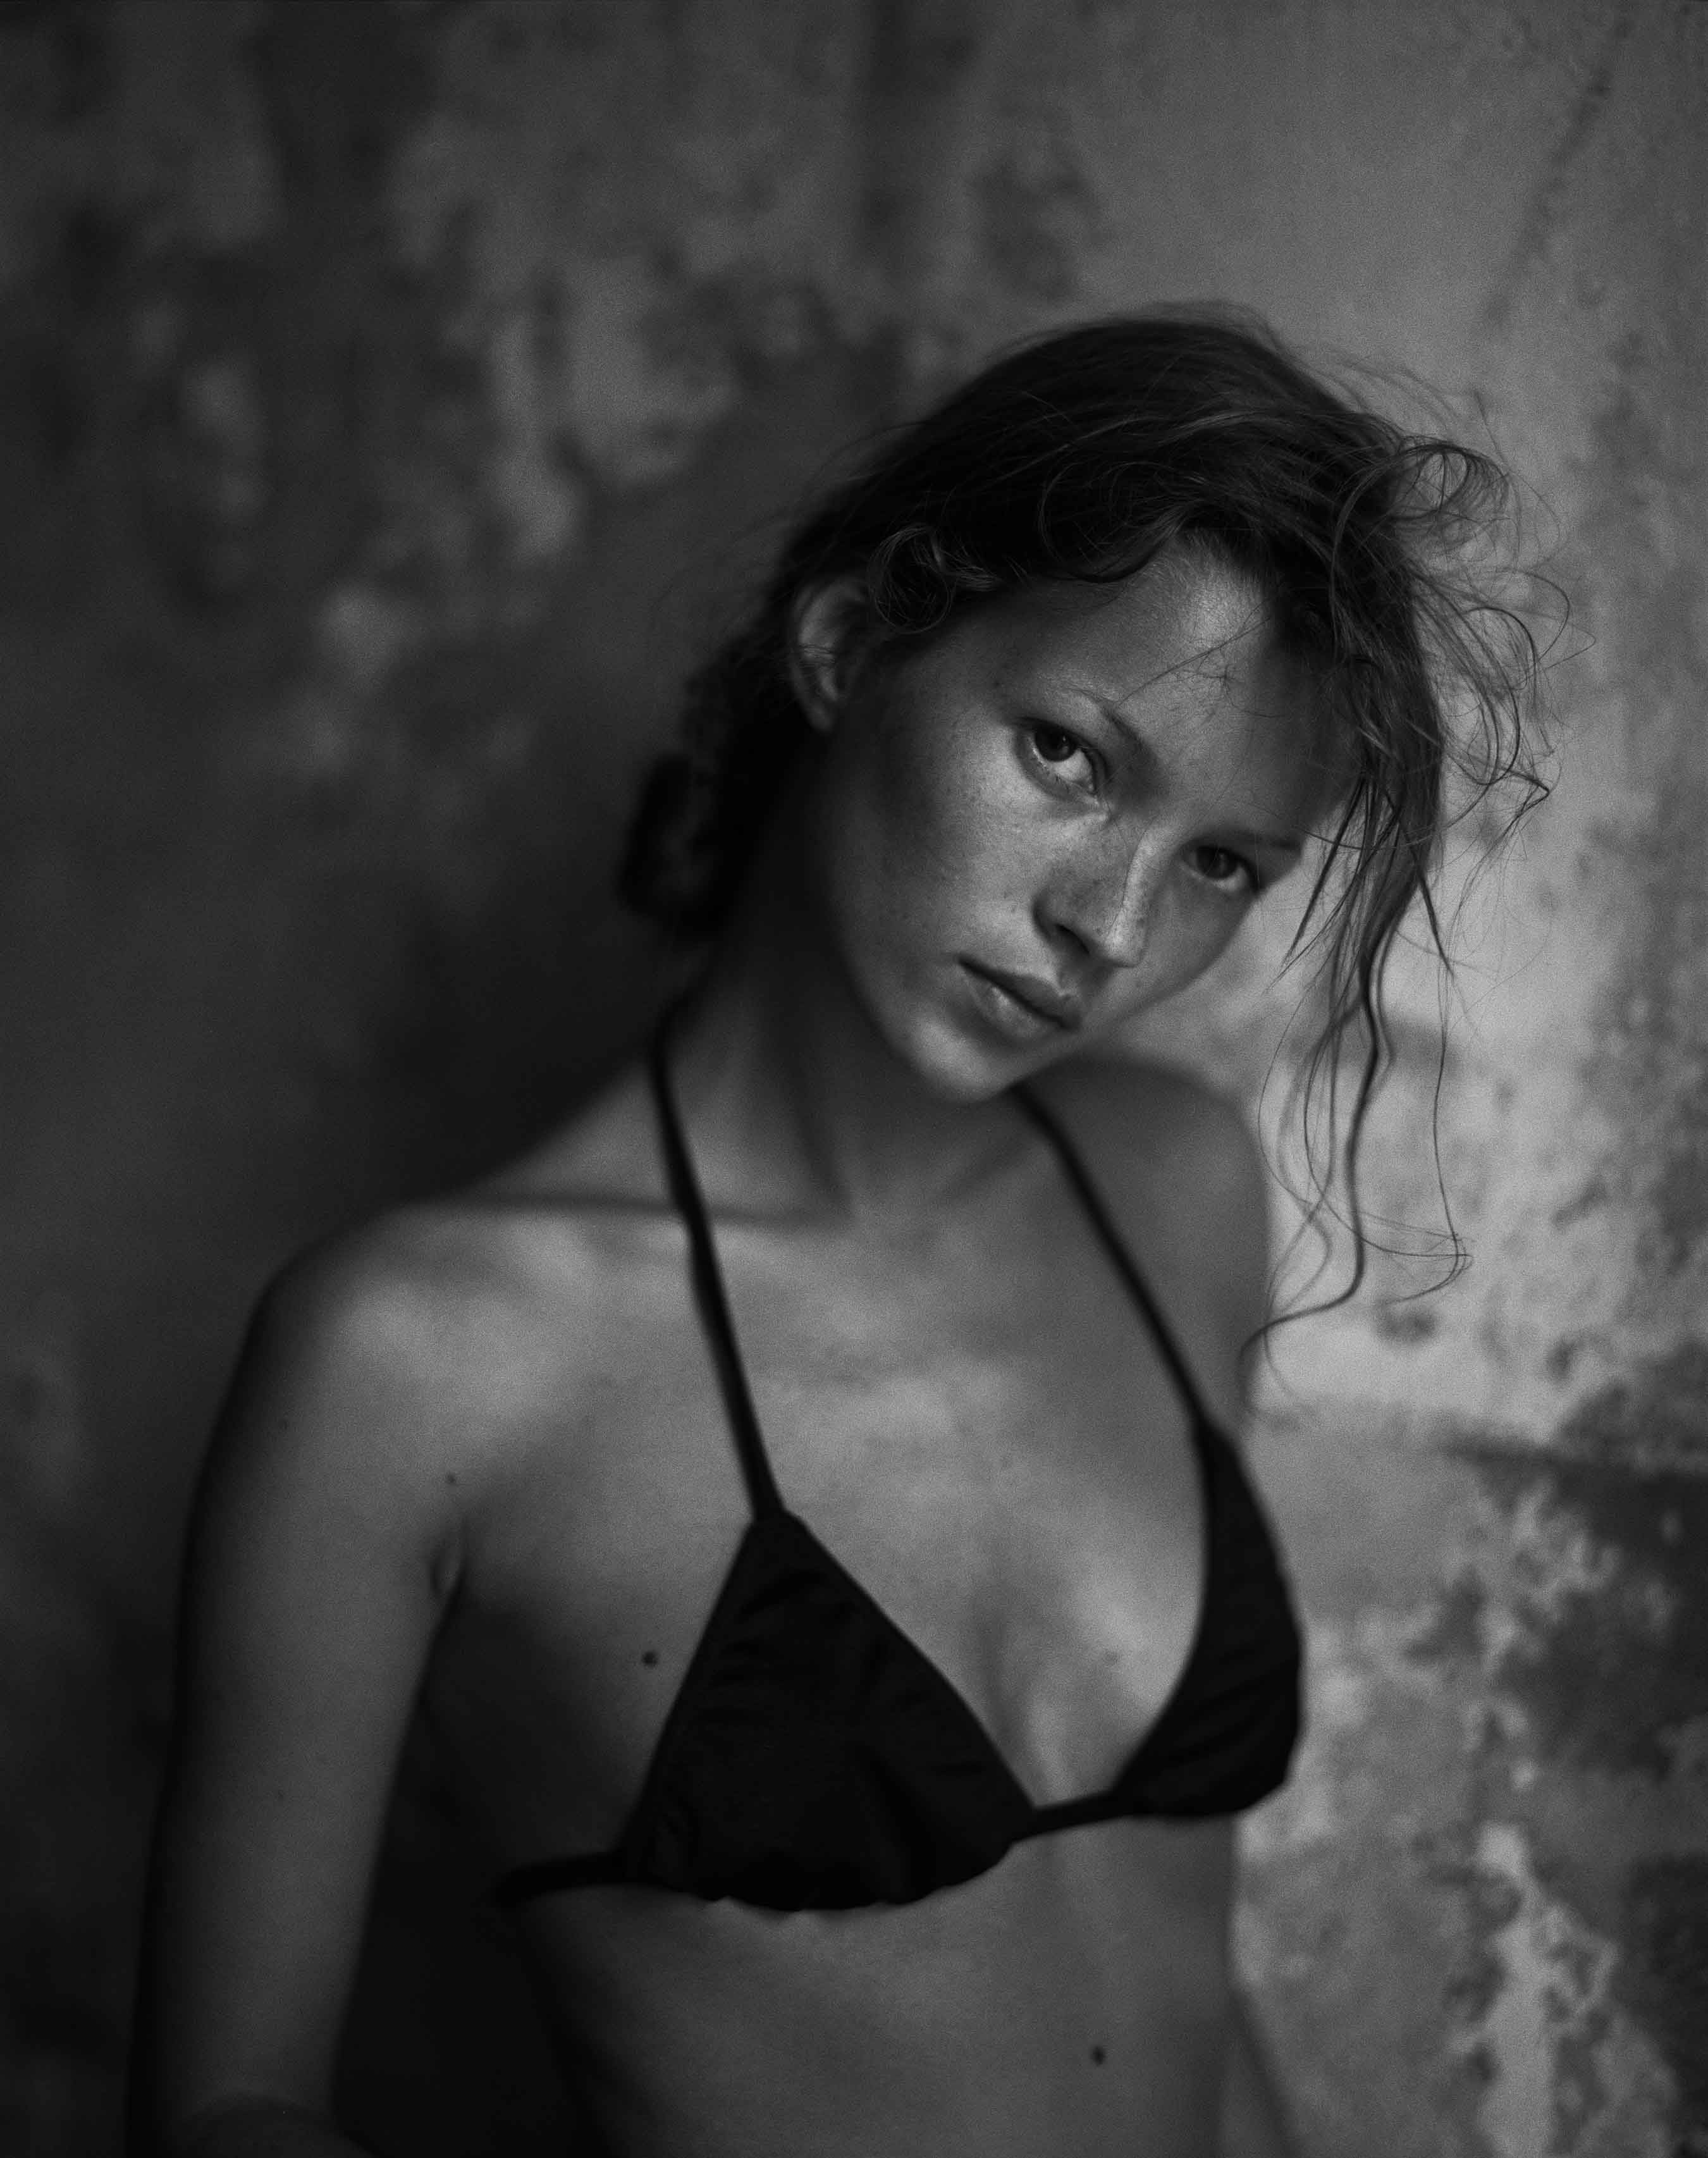 Kate Moss by Mario Sorrenti